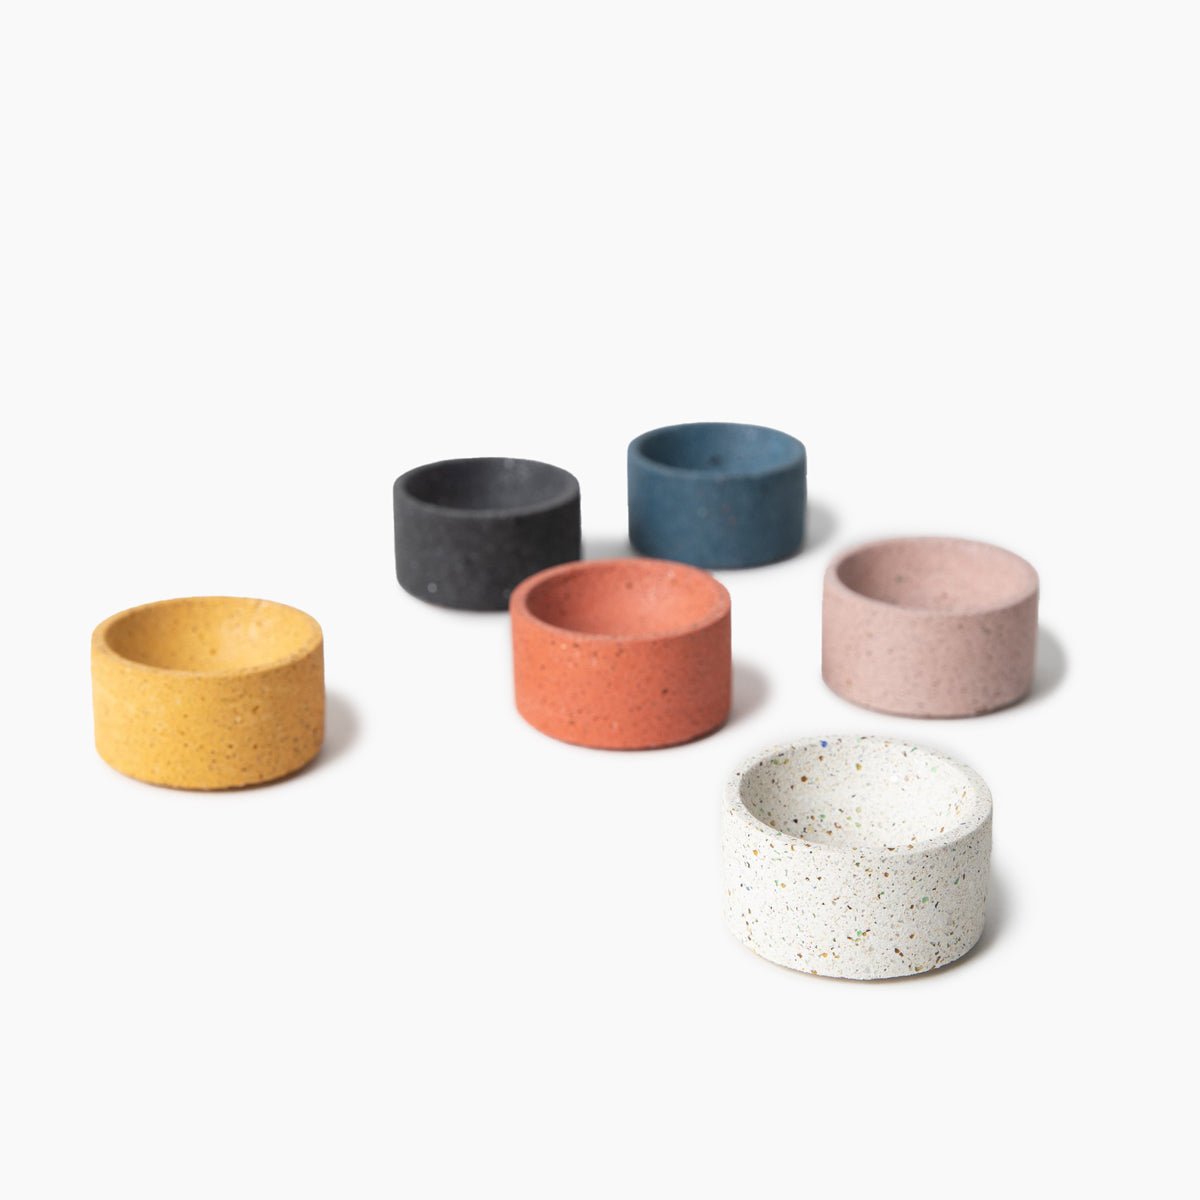 Terrazzo incense holders in assorted colors. Made by Pretti.Cool in Houston, Texas.